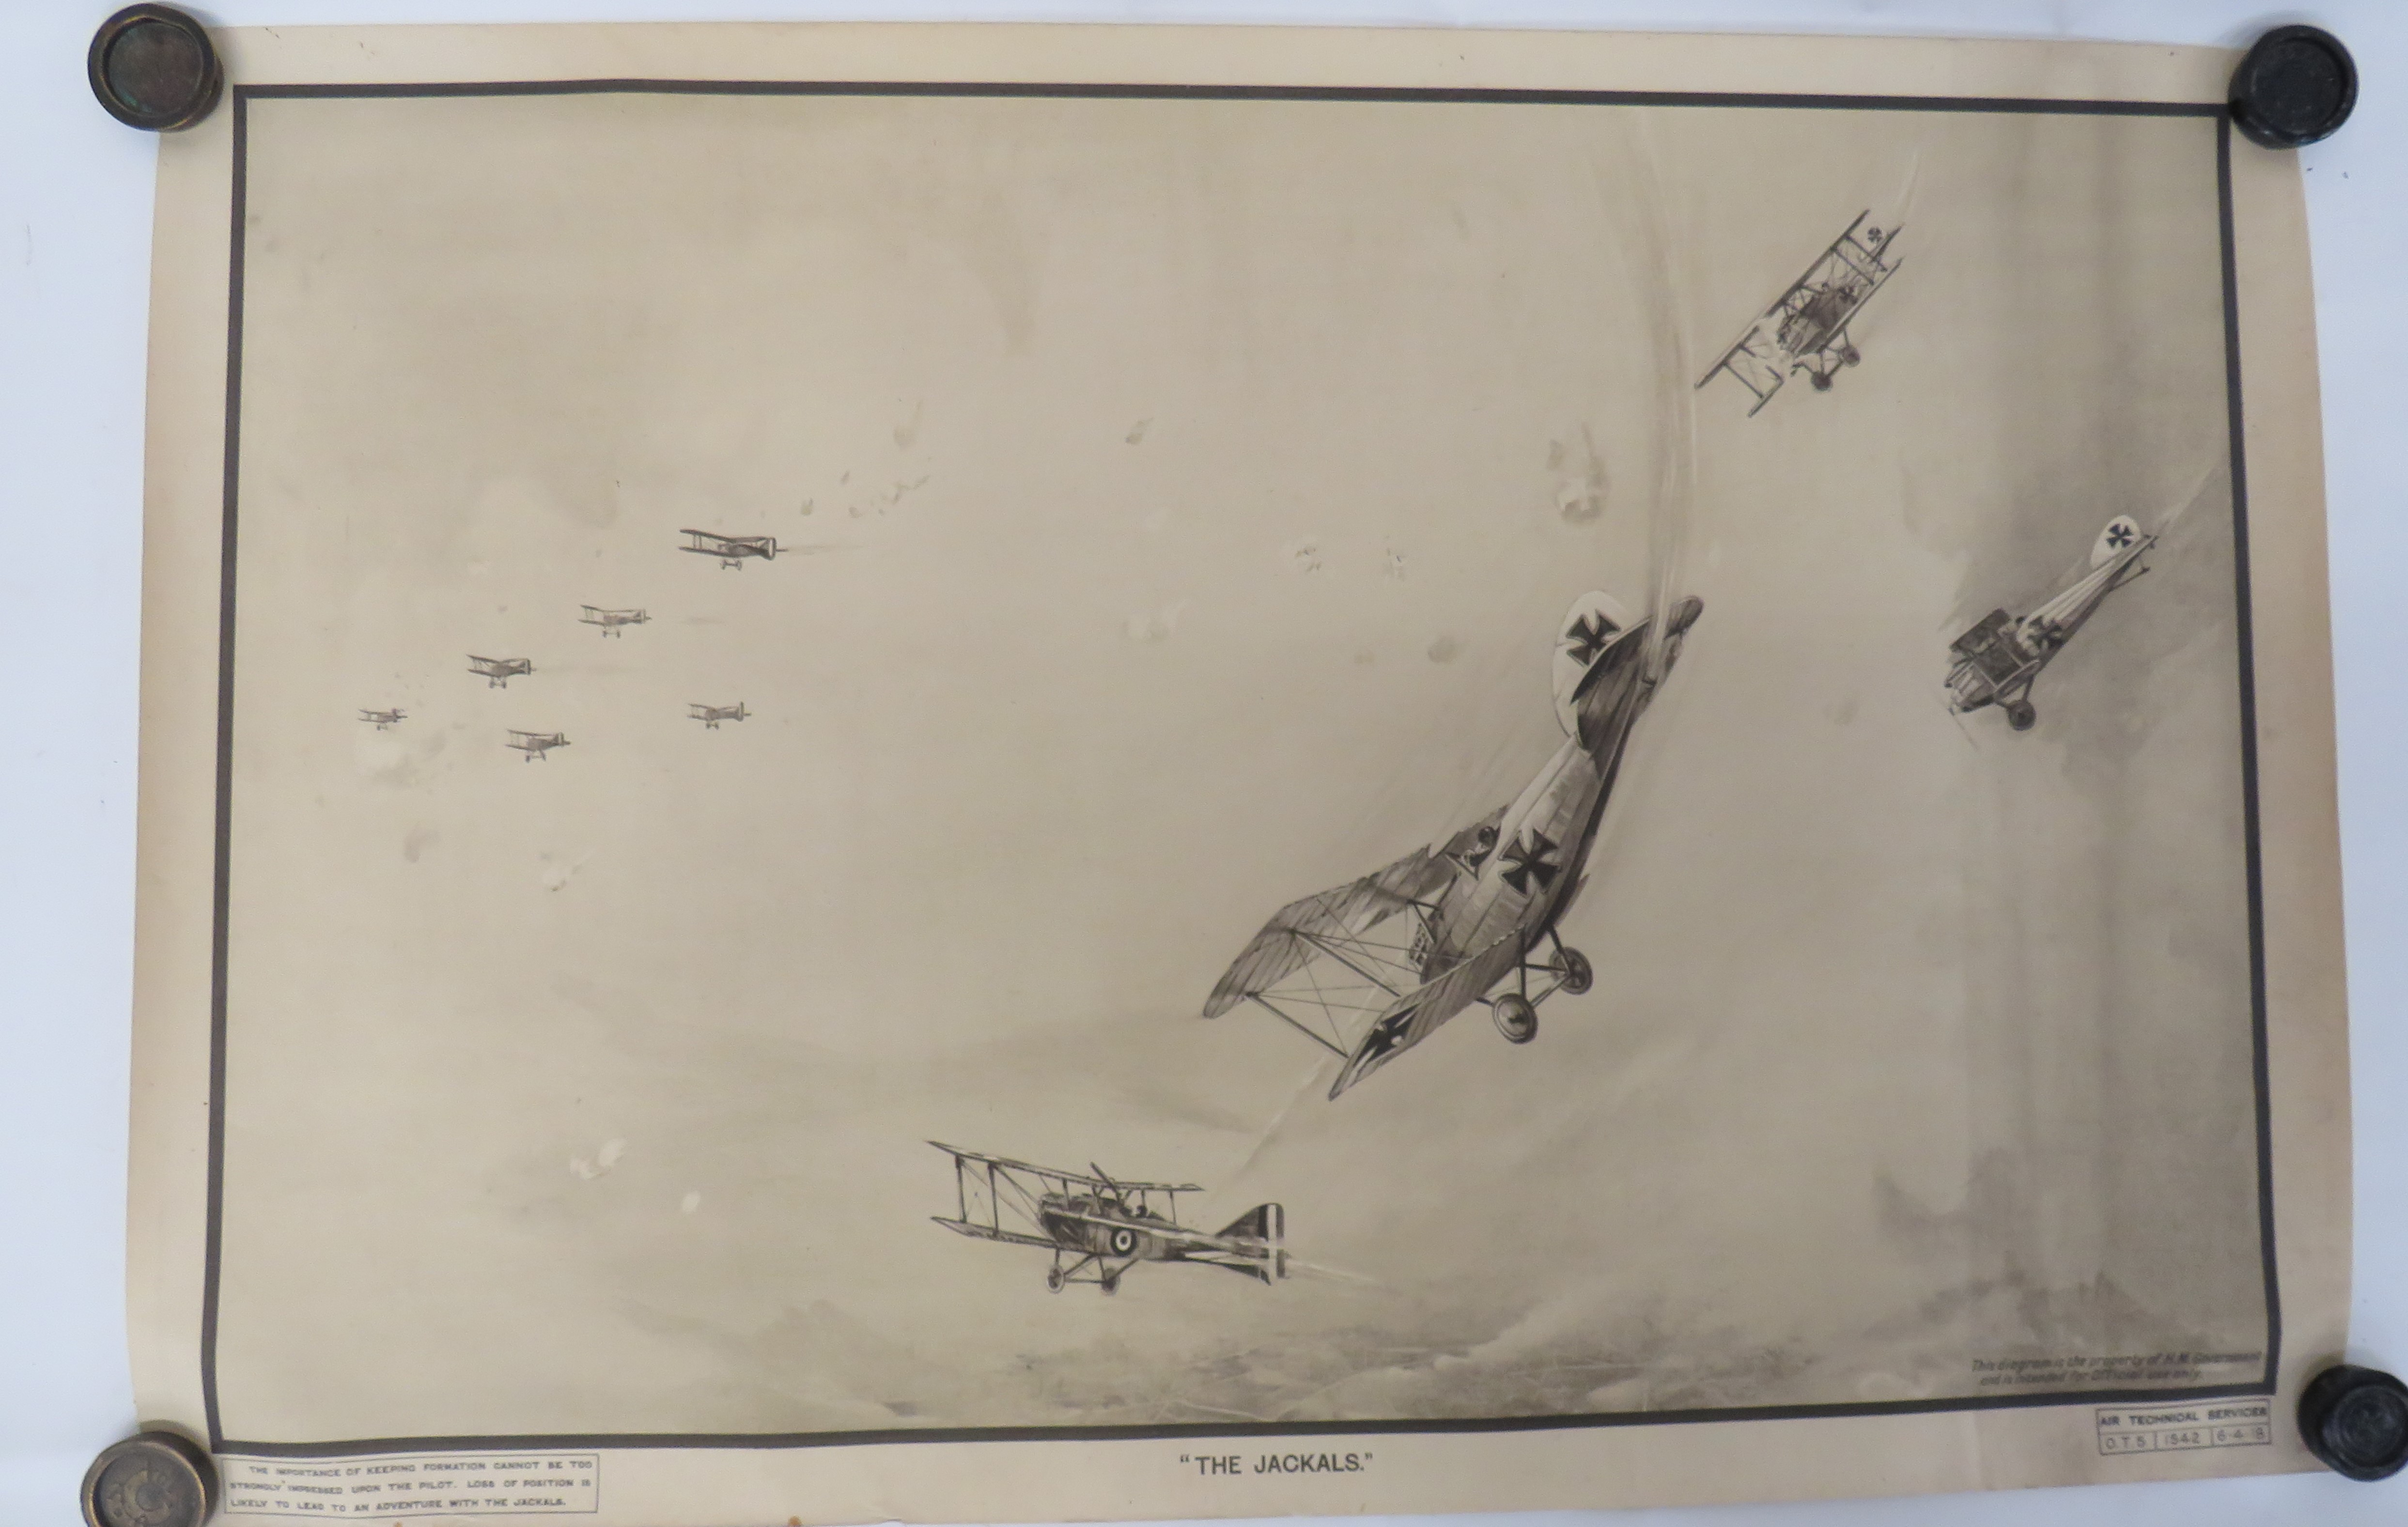 Scarce 1918 Dated RAF Training Poster "The Jackals" black, white and sepia, printed poster showing a